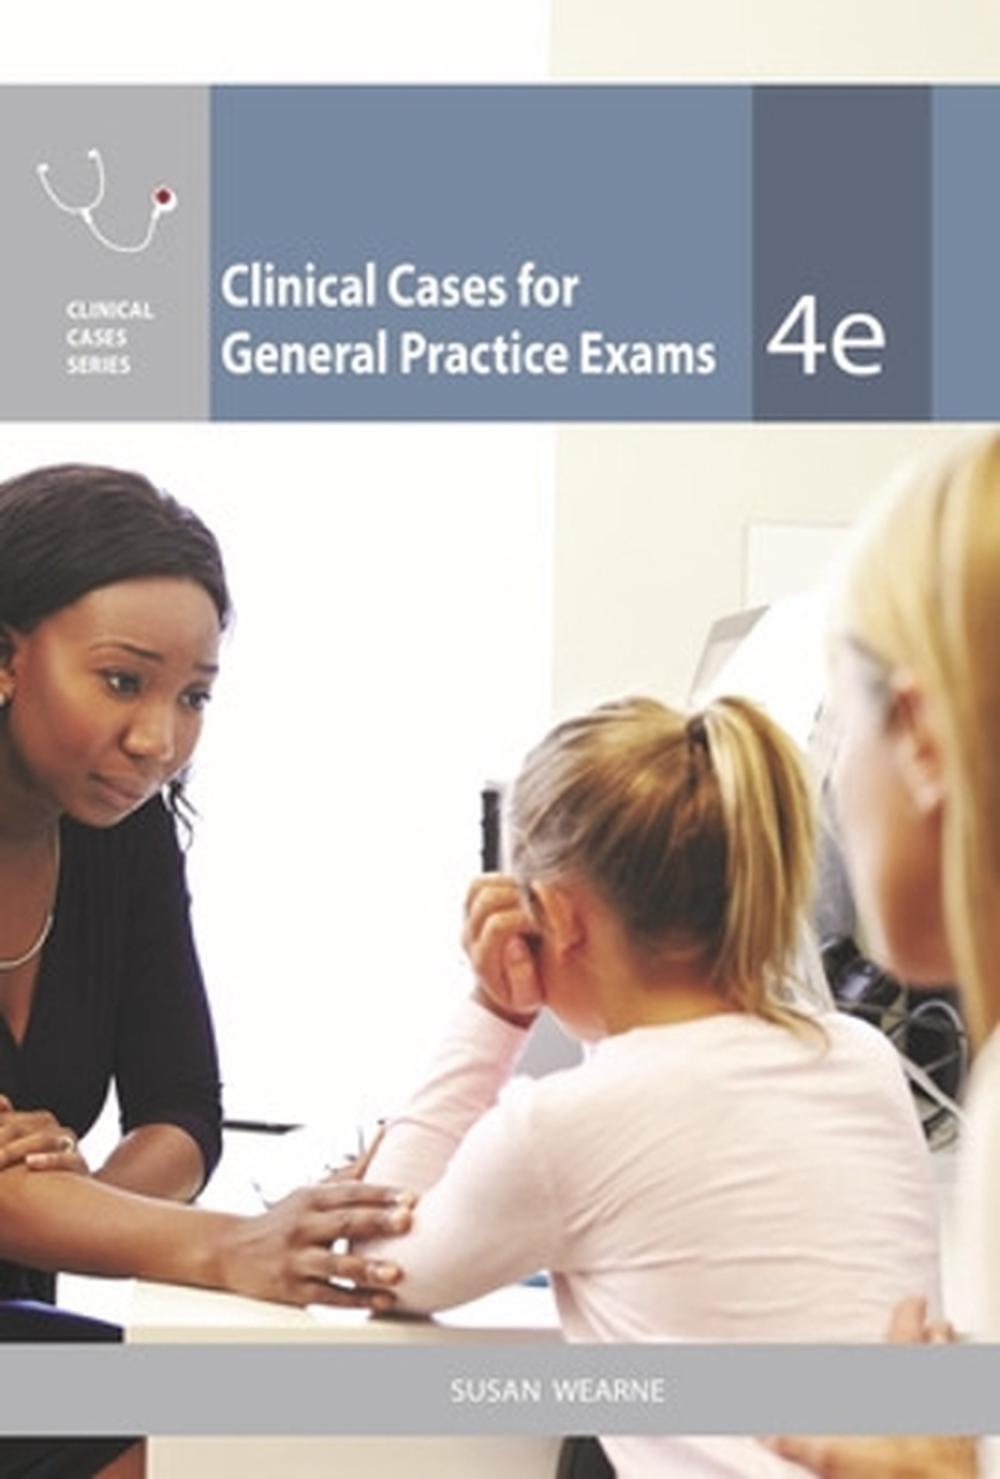 Clinical Cases for General Practice Exams, 4th Edition by Susan Wearne